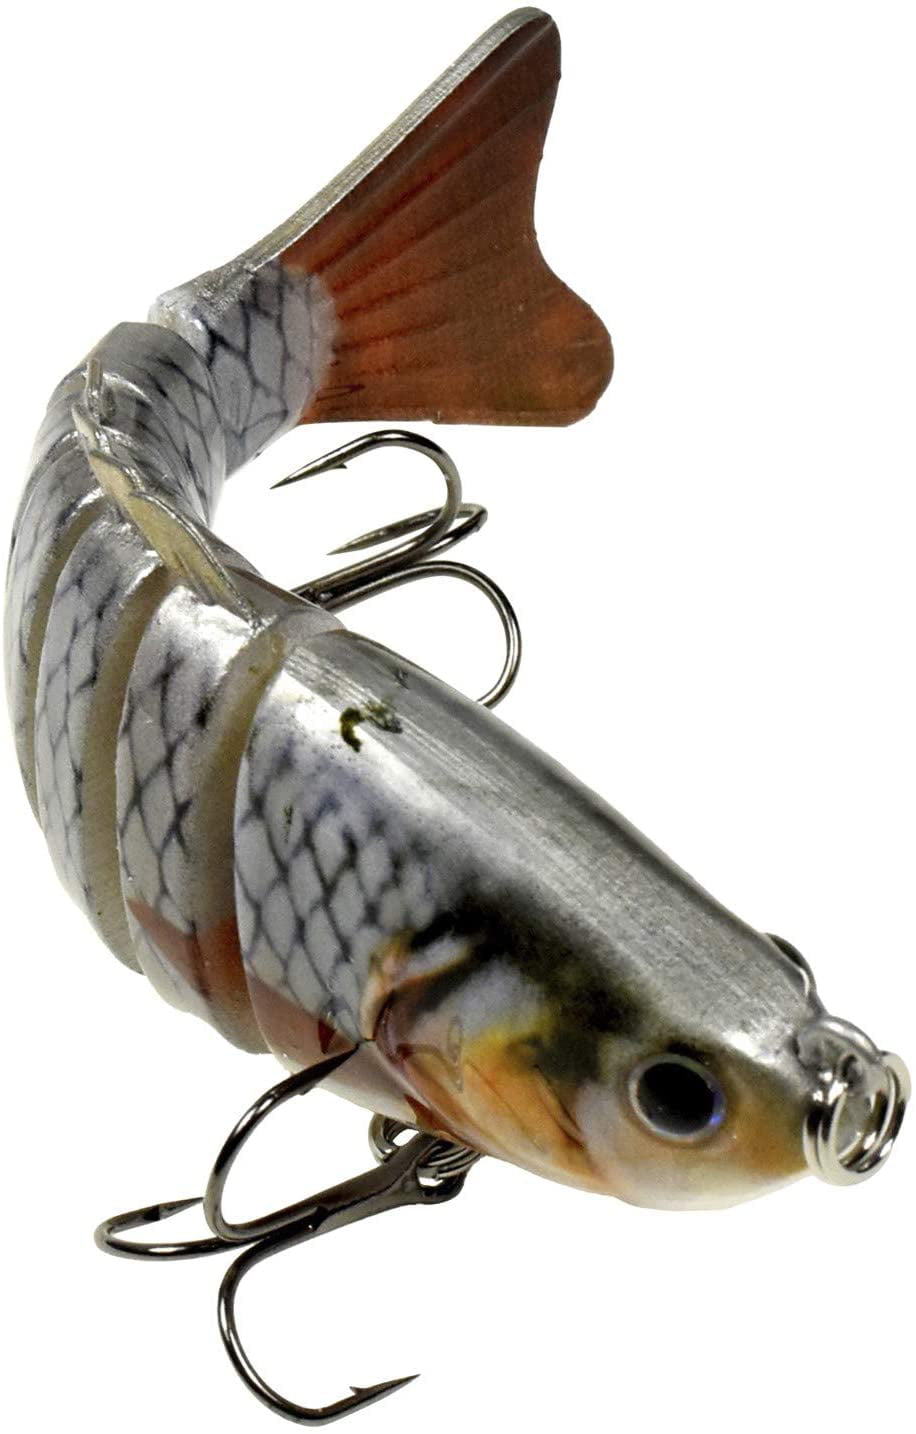 Fishing Solutions A patent-pending lure to hold manufactured bait that  mirrors the aesthetics of baitfish. Includes 3 independent lures  representing a section of baitfish, 3 high-carbon steel 5/0 circle hooks,  and 6